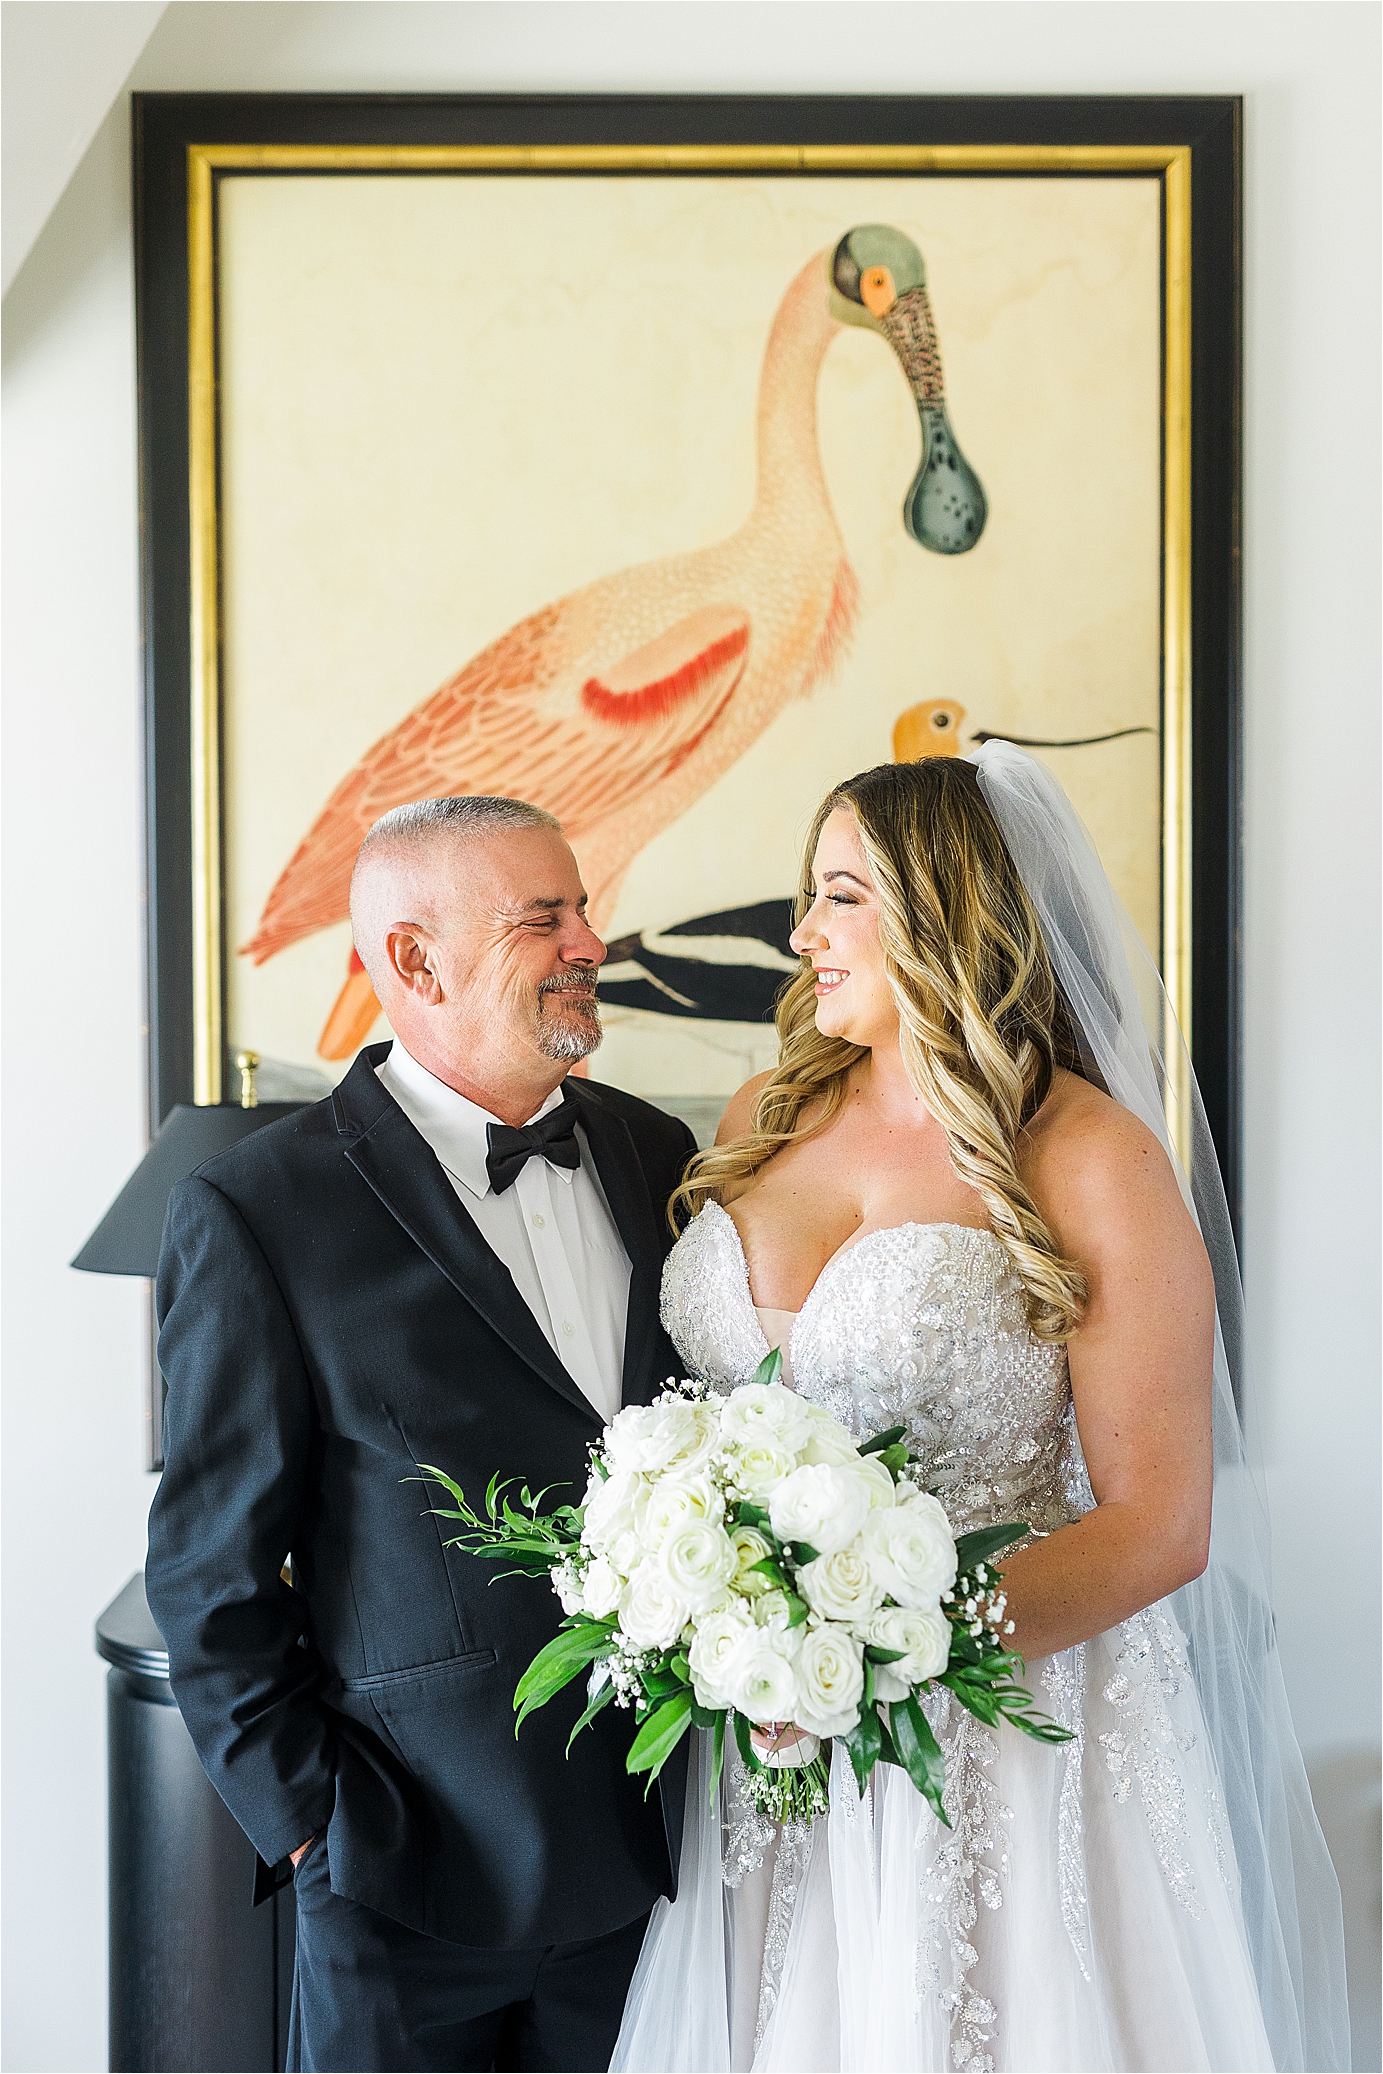 A father and daughter smile at each other on her wedding day at Redberry Estate in San Antonio, Texas